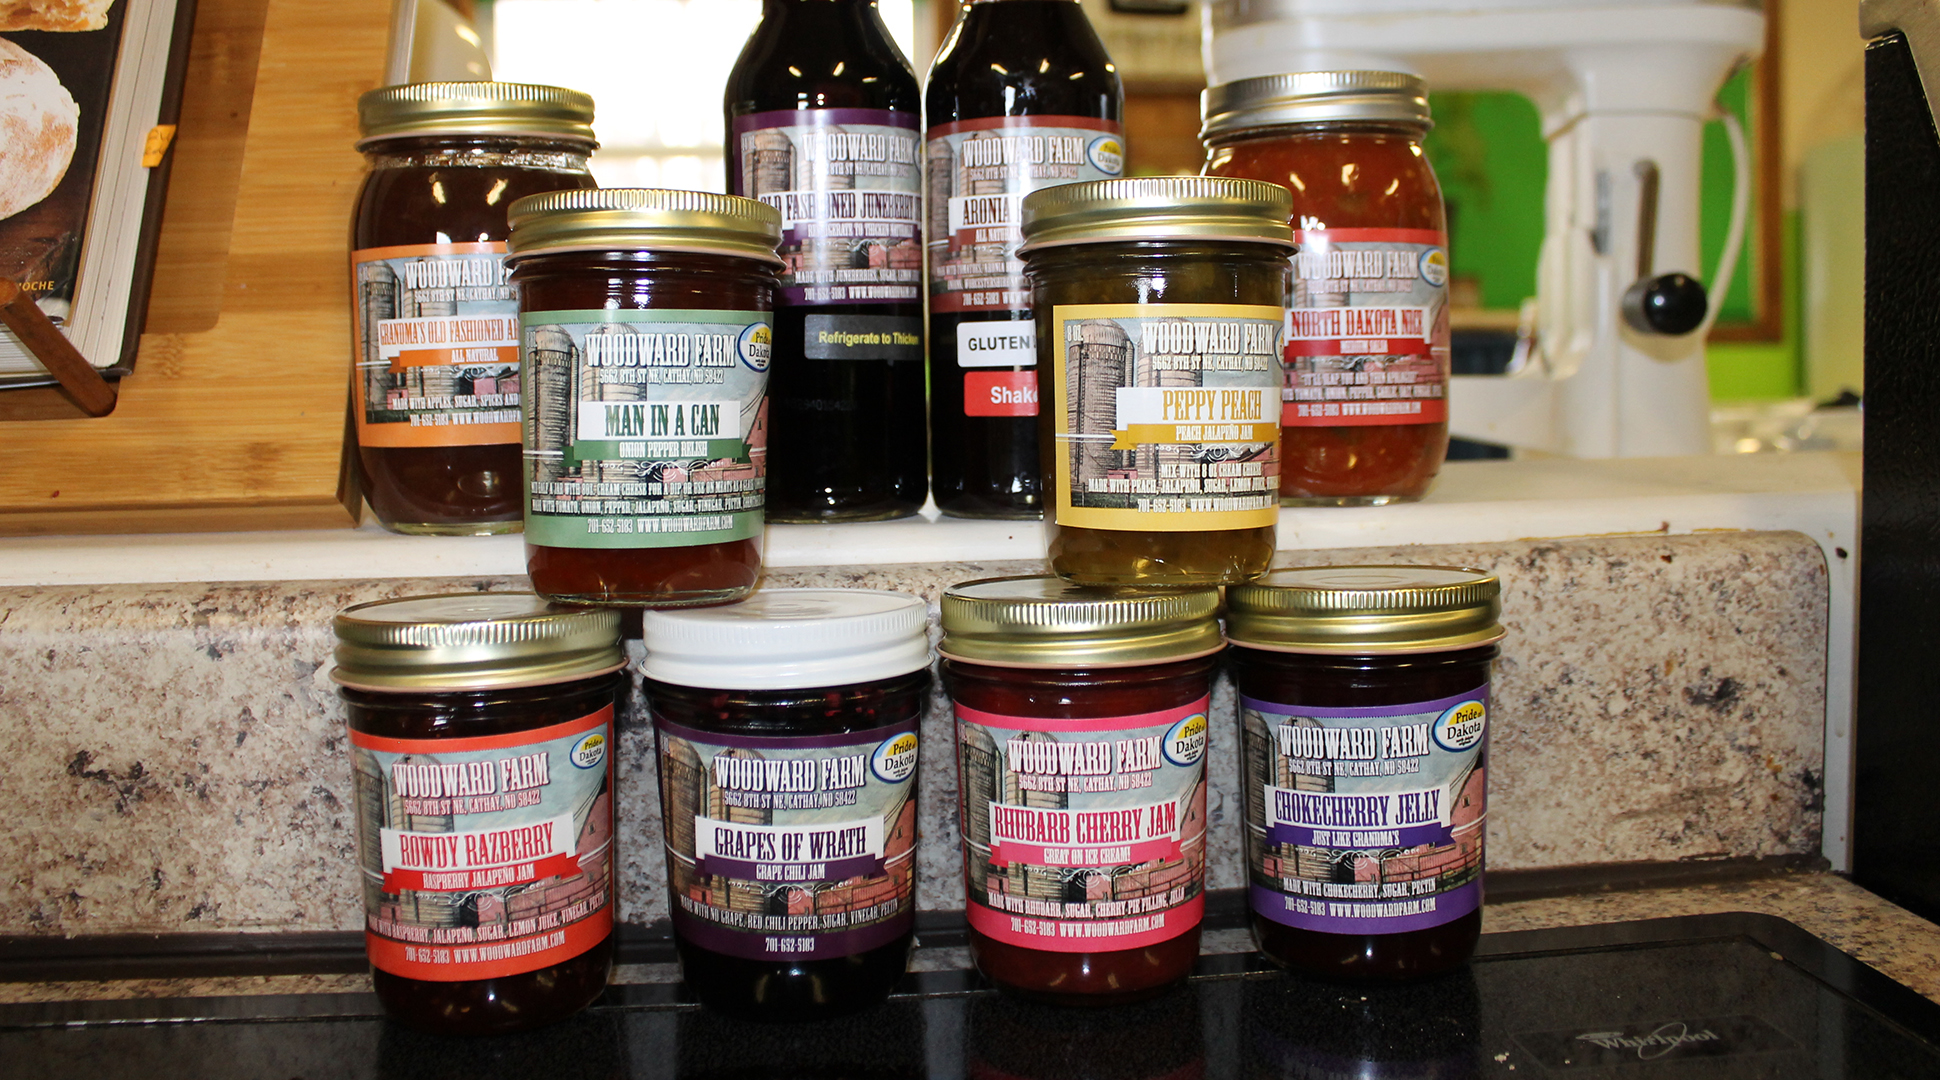 Jams, jellies, and more